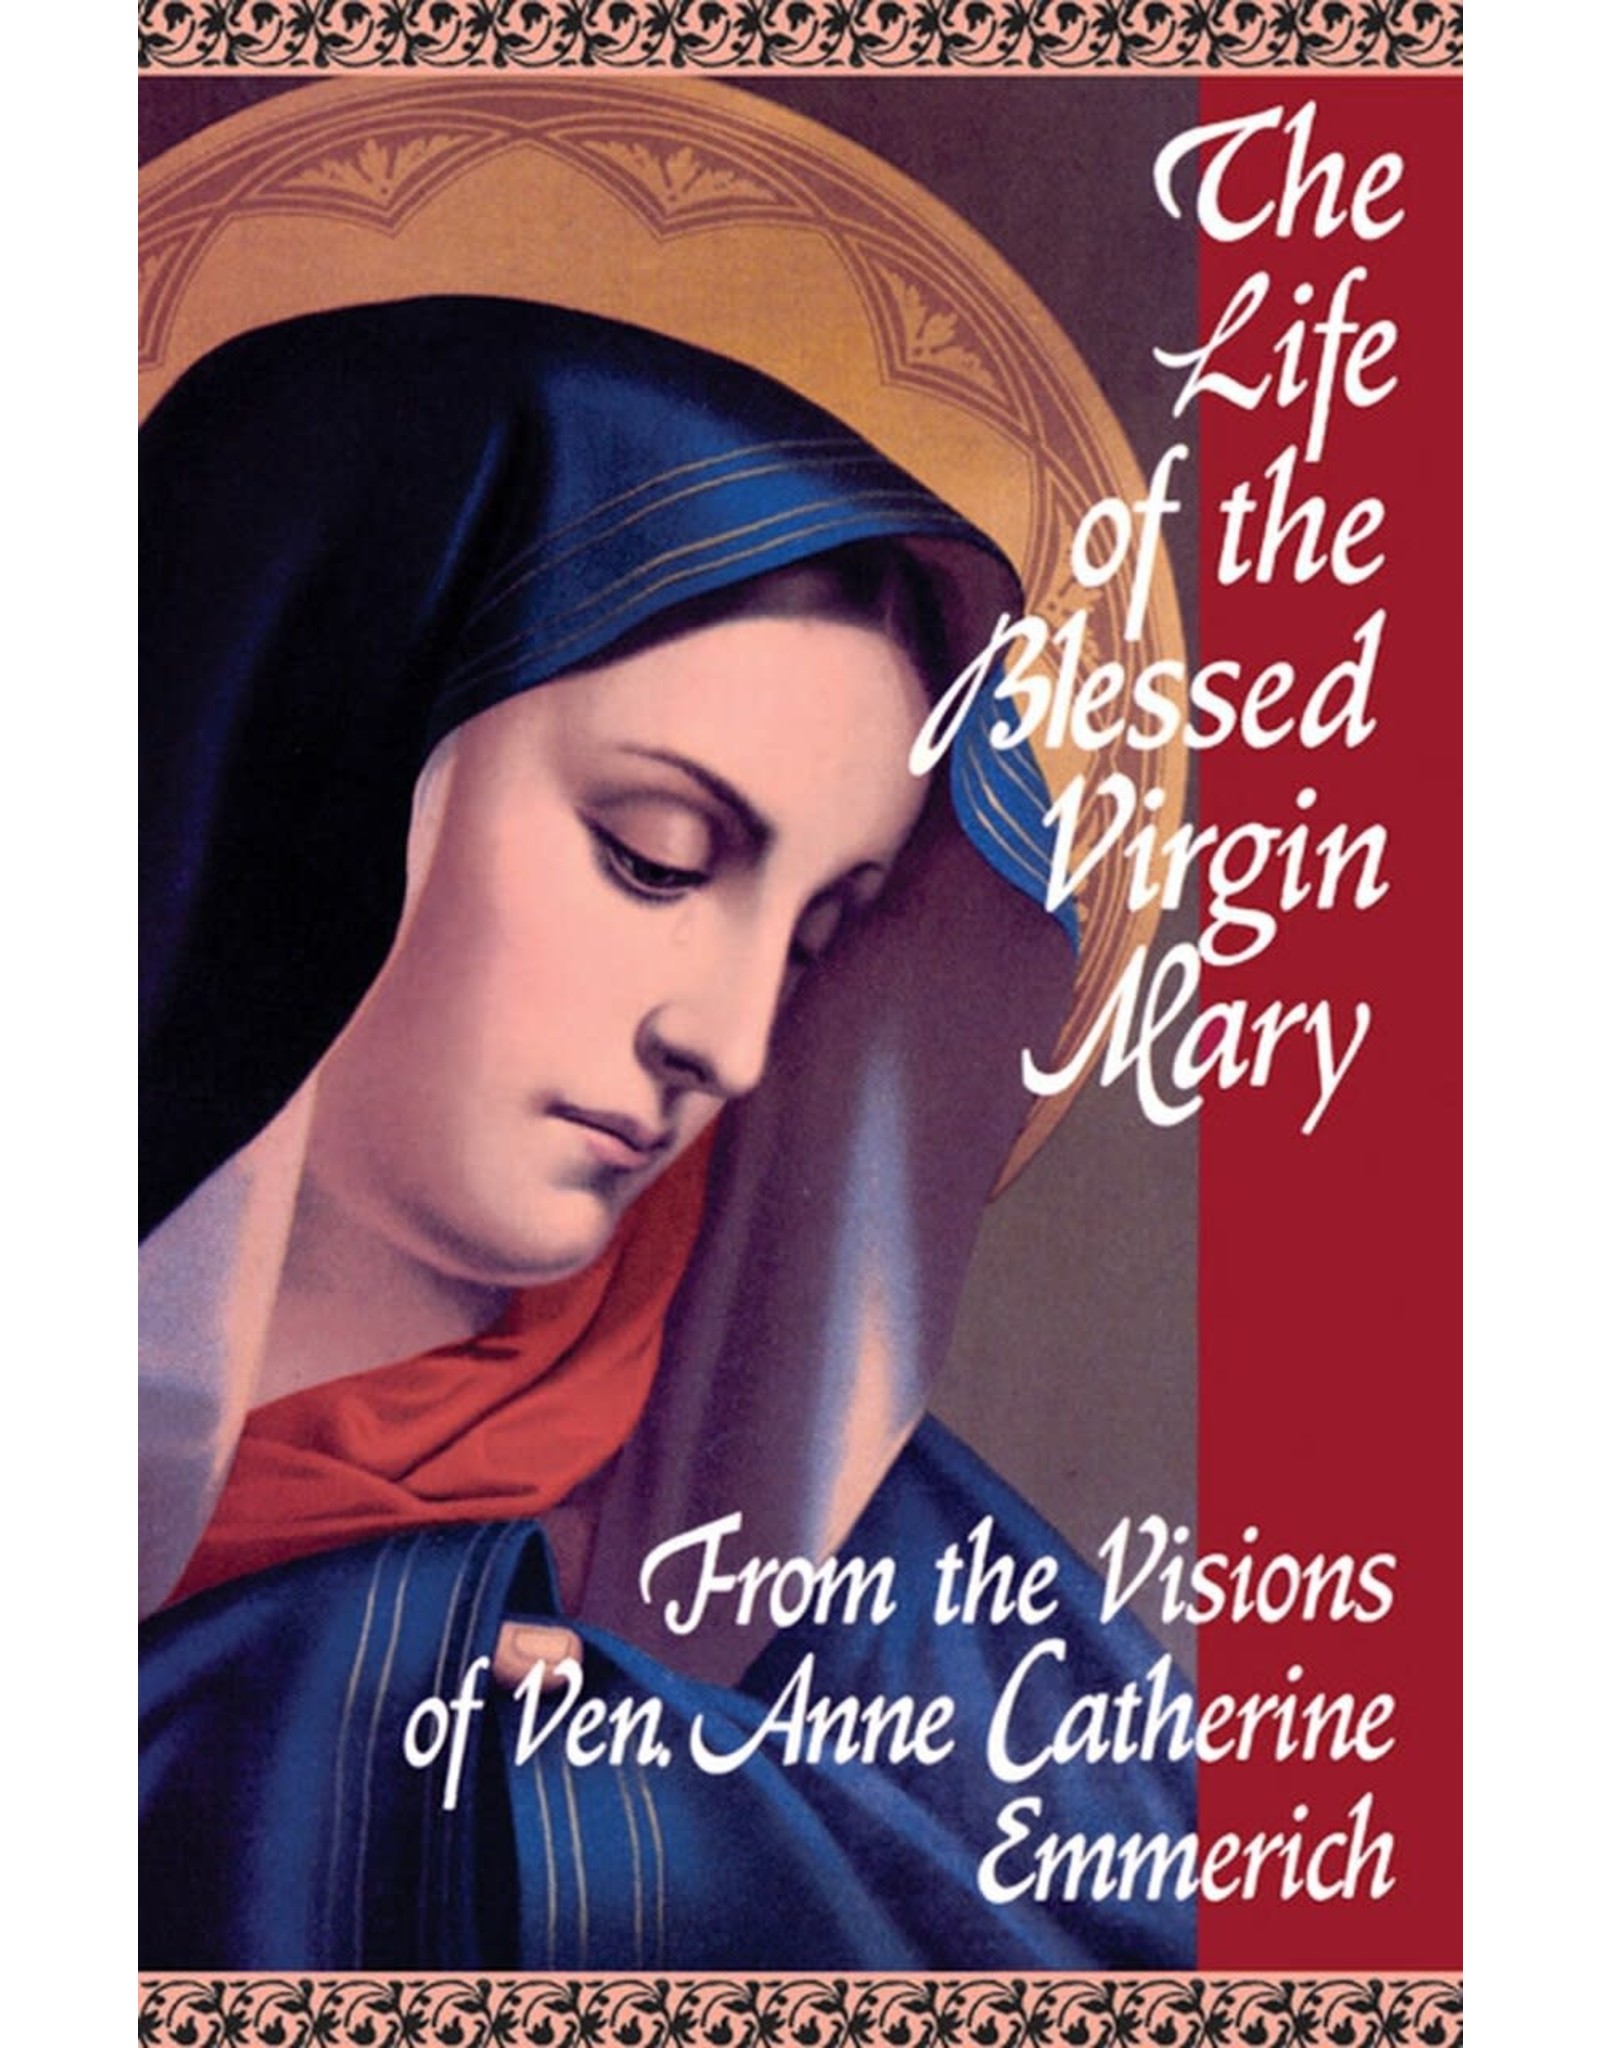 Tan Books The Life of the Blessed Virgin Mary From the Visions of Ven. Anne Catherine Emmerich (Paperback)